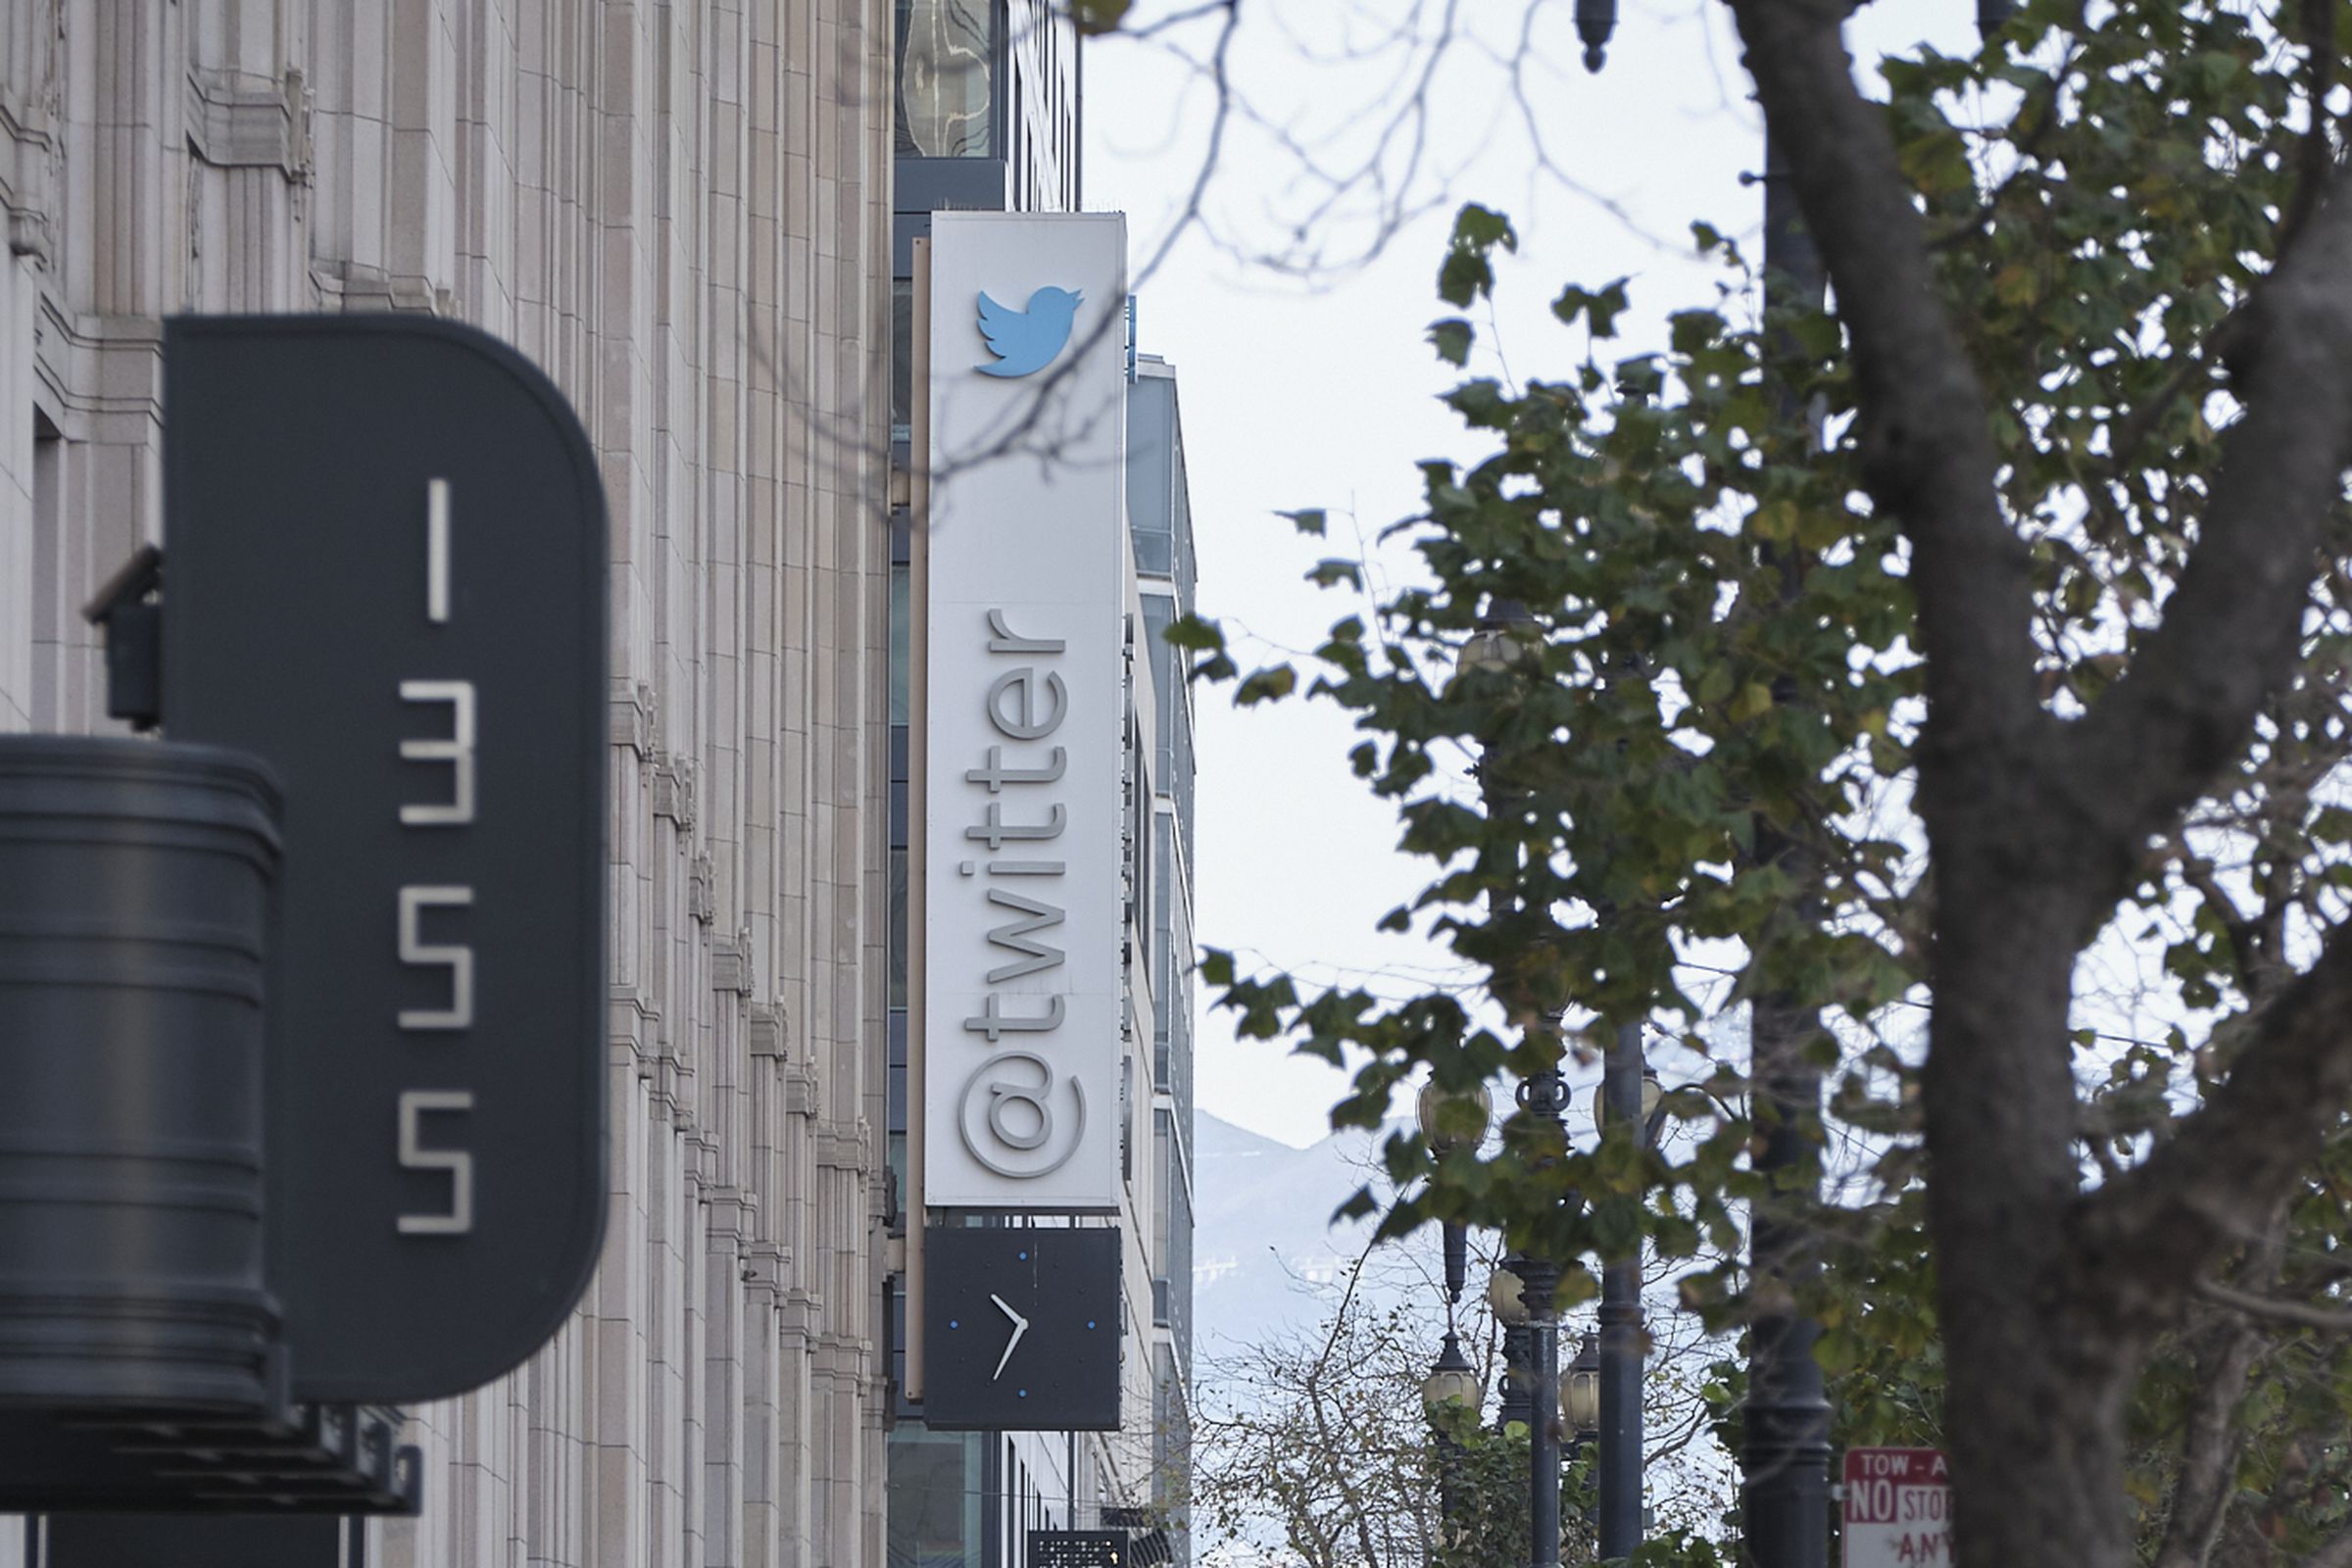 Twitter’s board may have its work cut out for it.